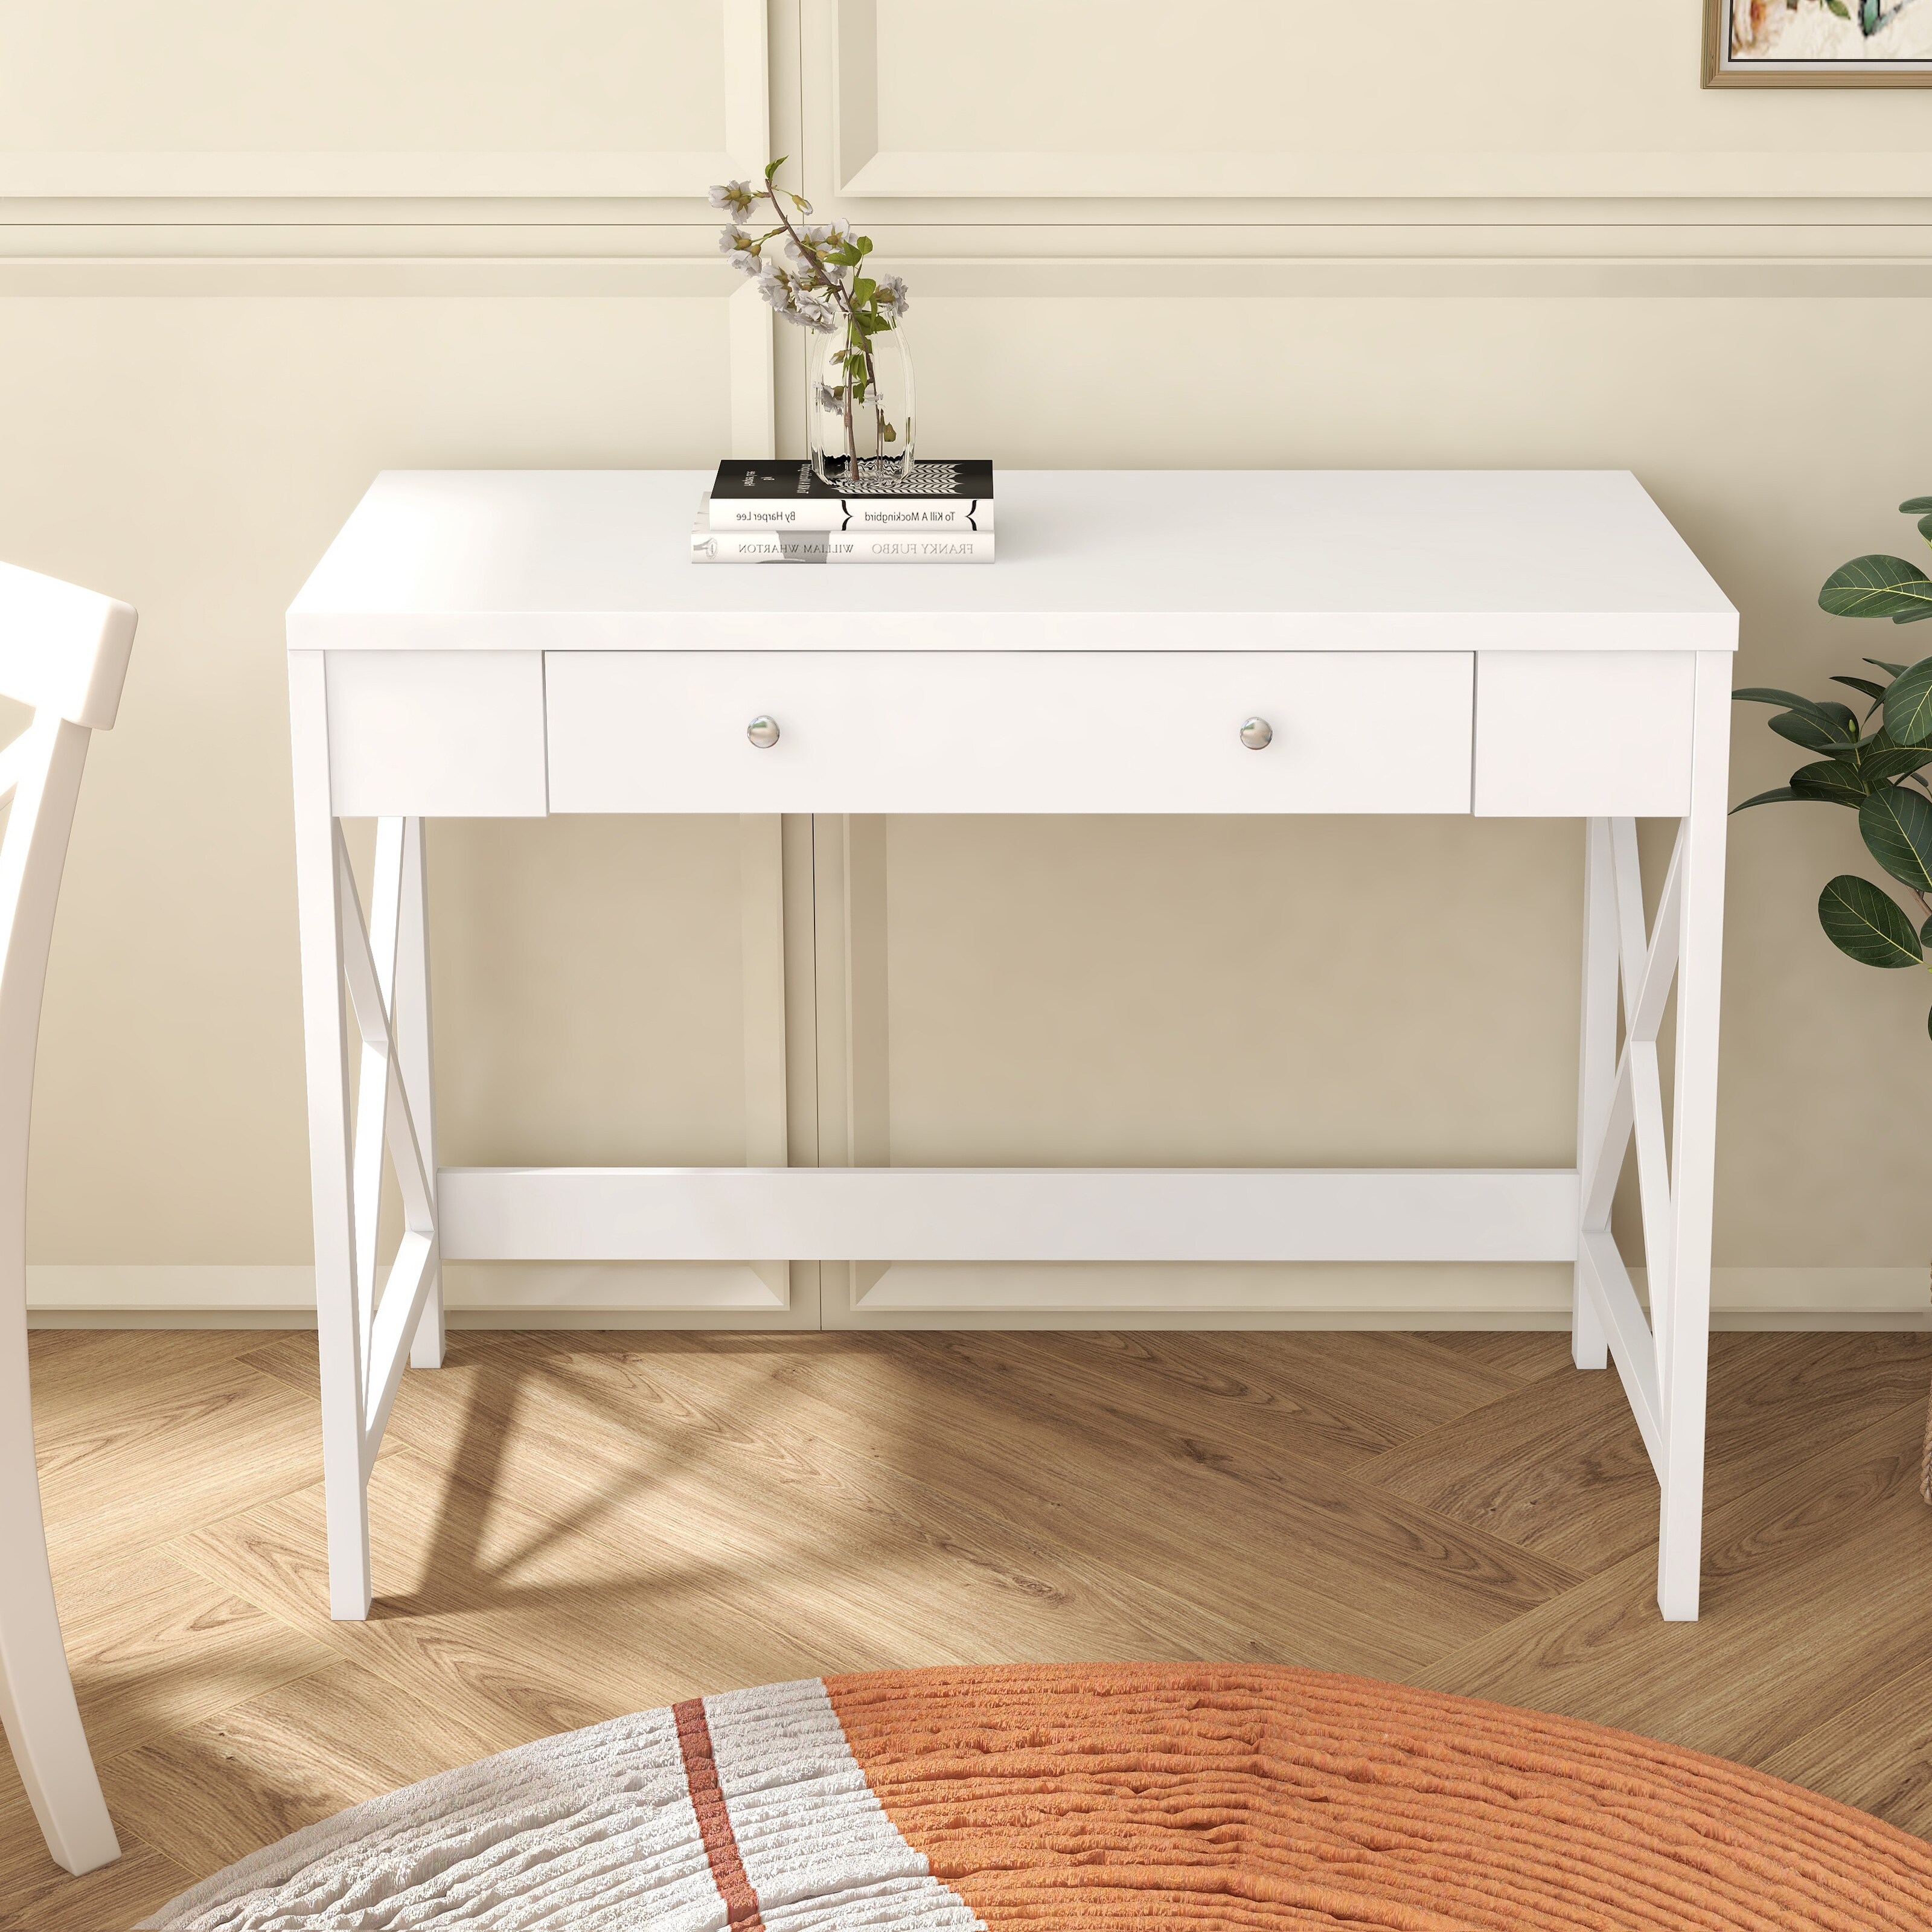 Modern Home Office Desk Study Table with Storage Computer Desk Writing Desk and X Design Makeup Vanity Dressing Table